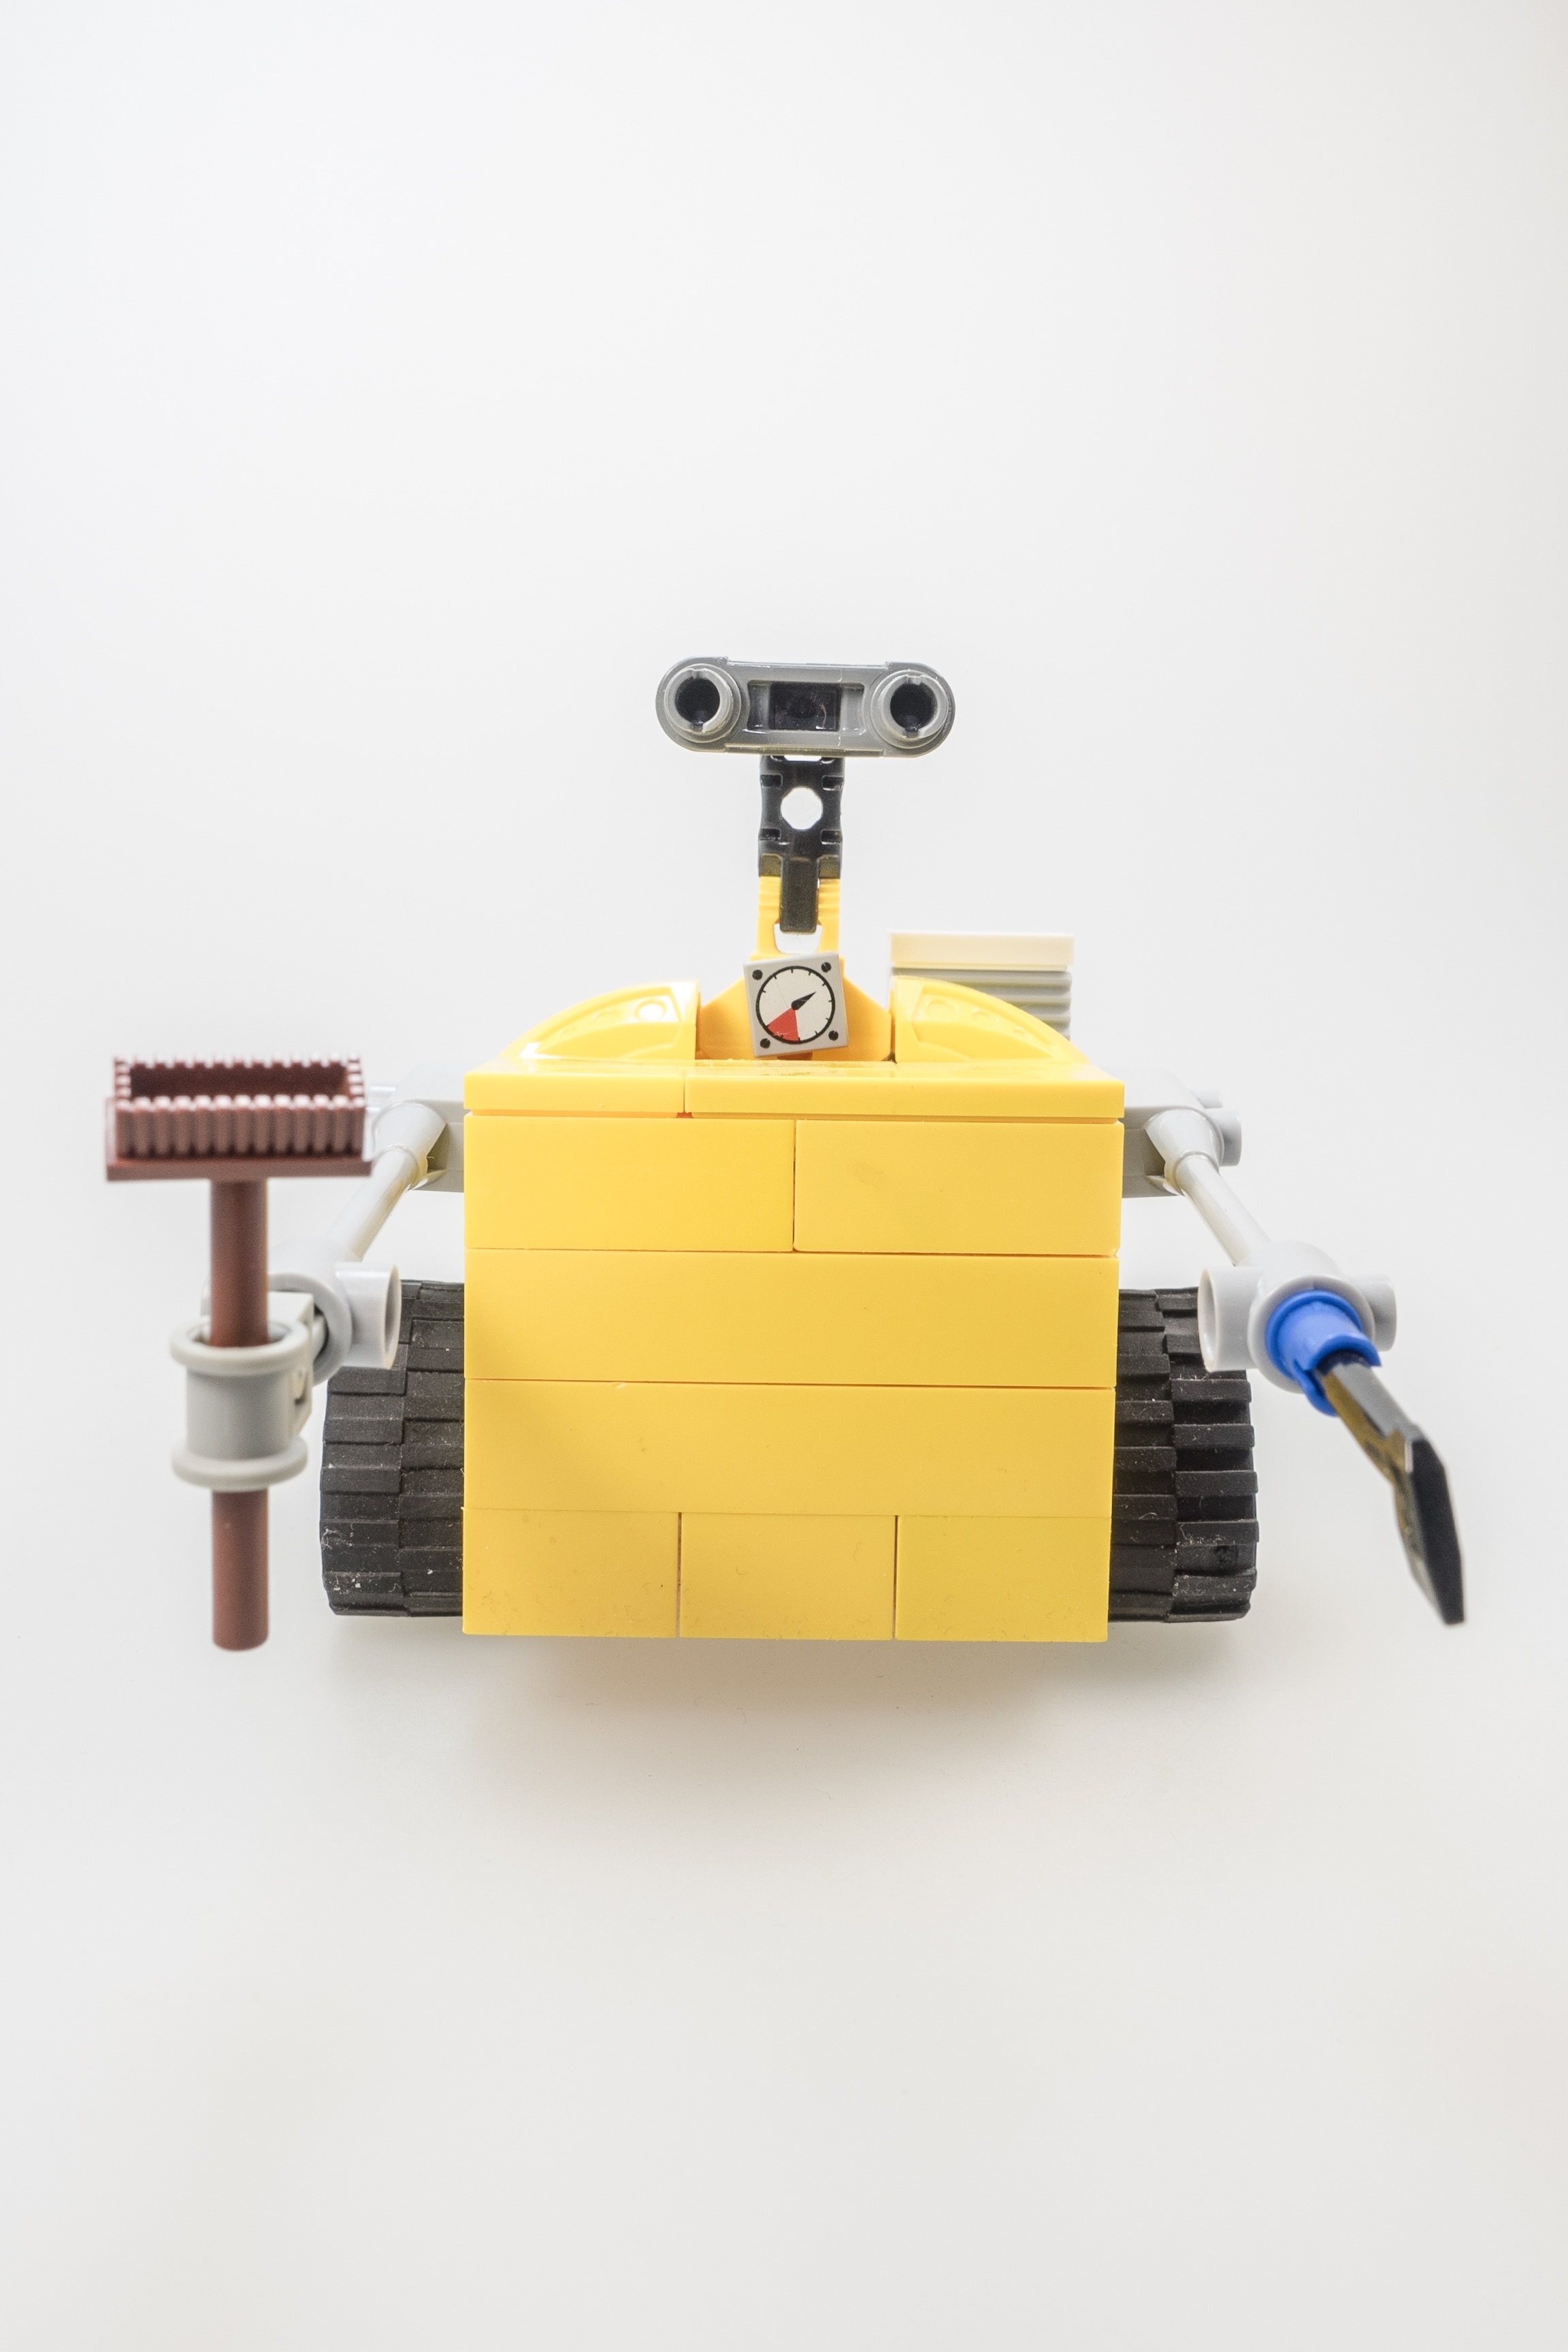 yellow and gray robot toy illustration